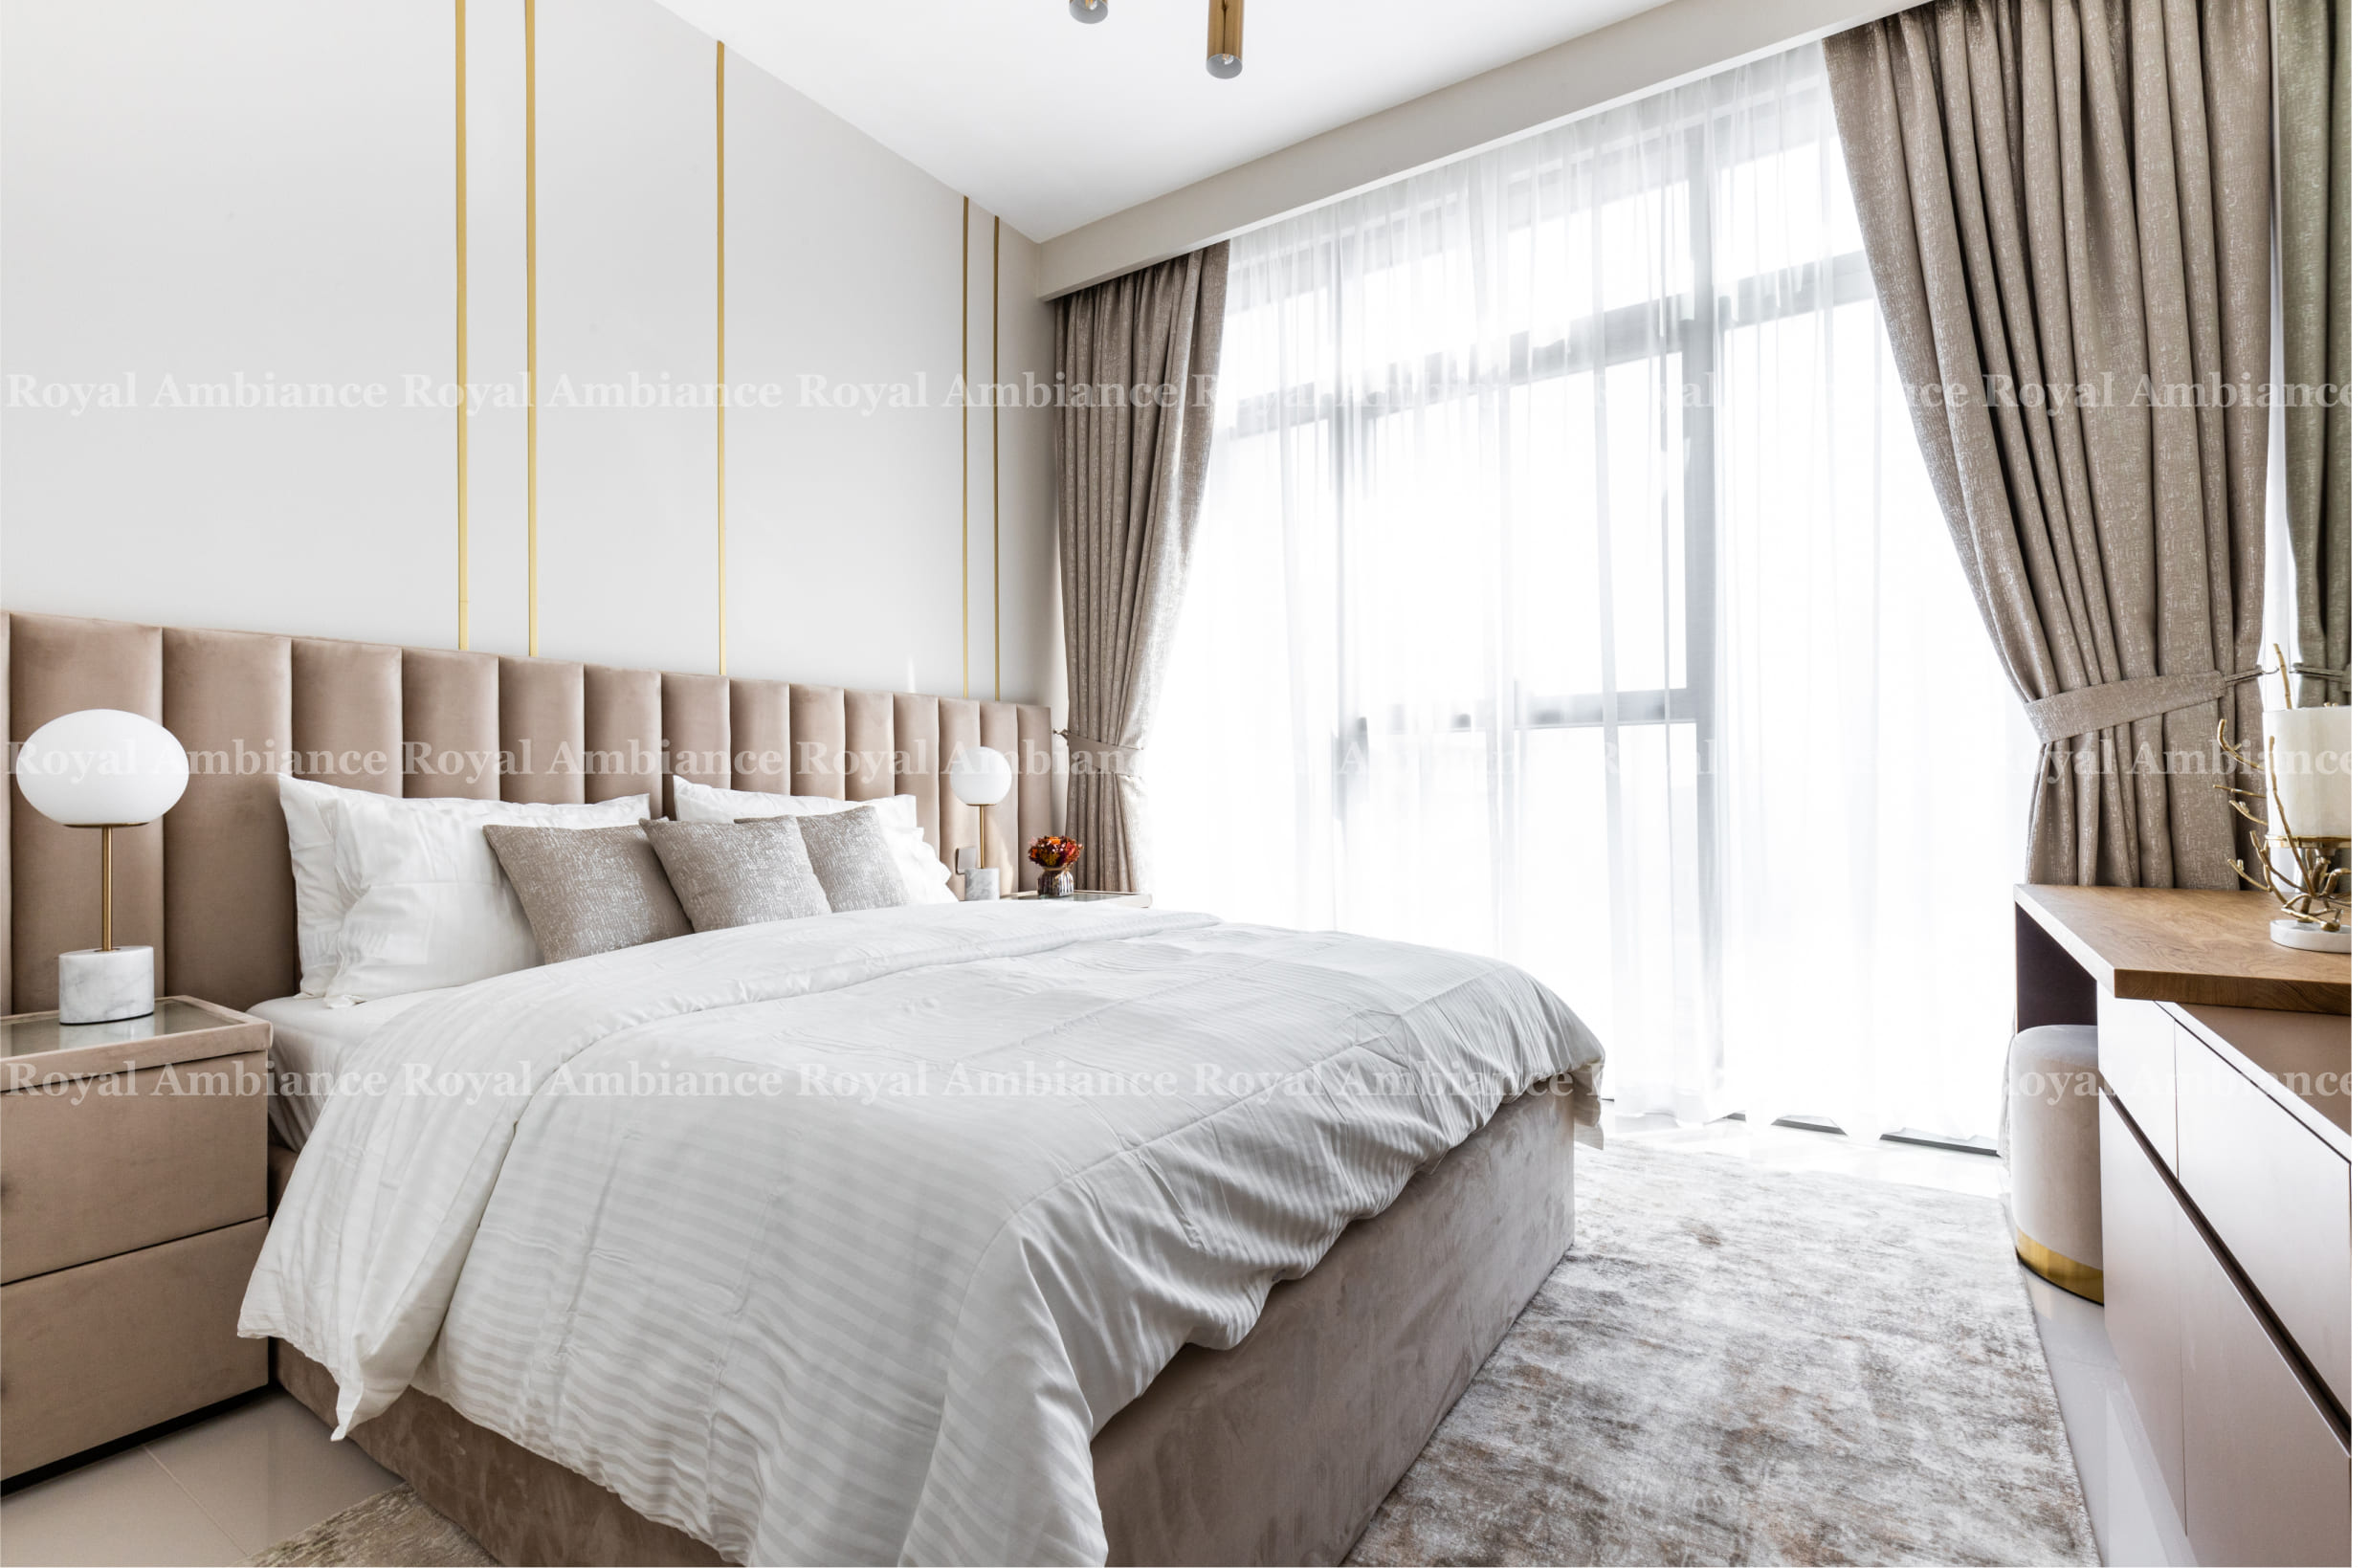 Beach Vista by Emaar Apartment Bedroom Renovation Fit Out Design